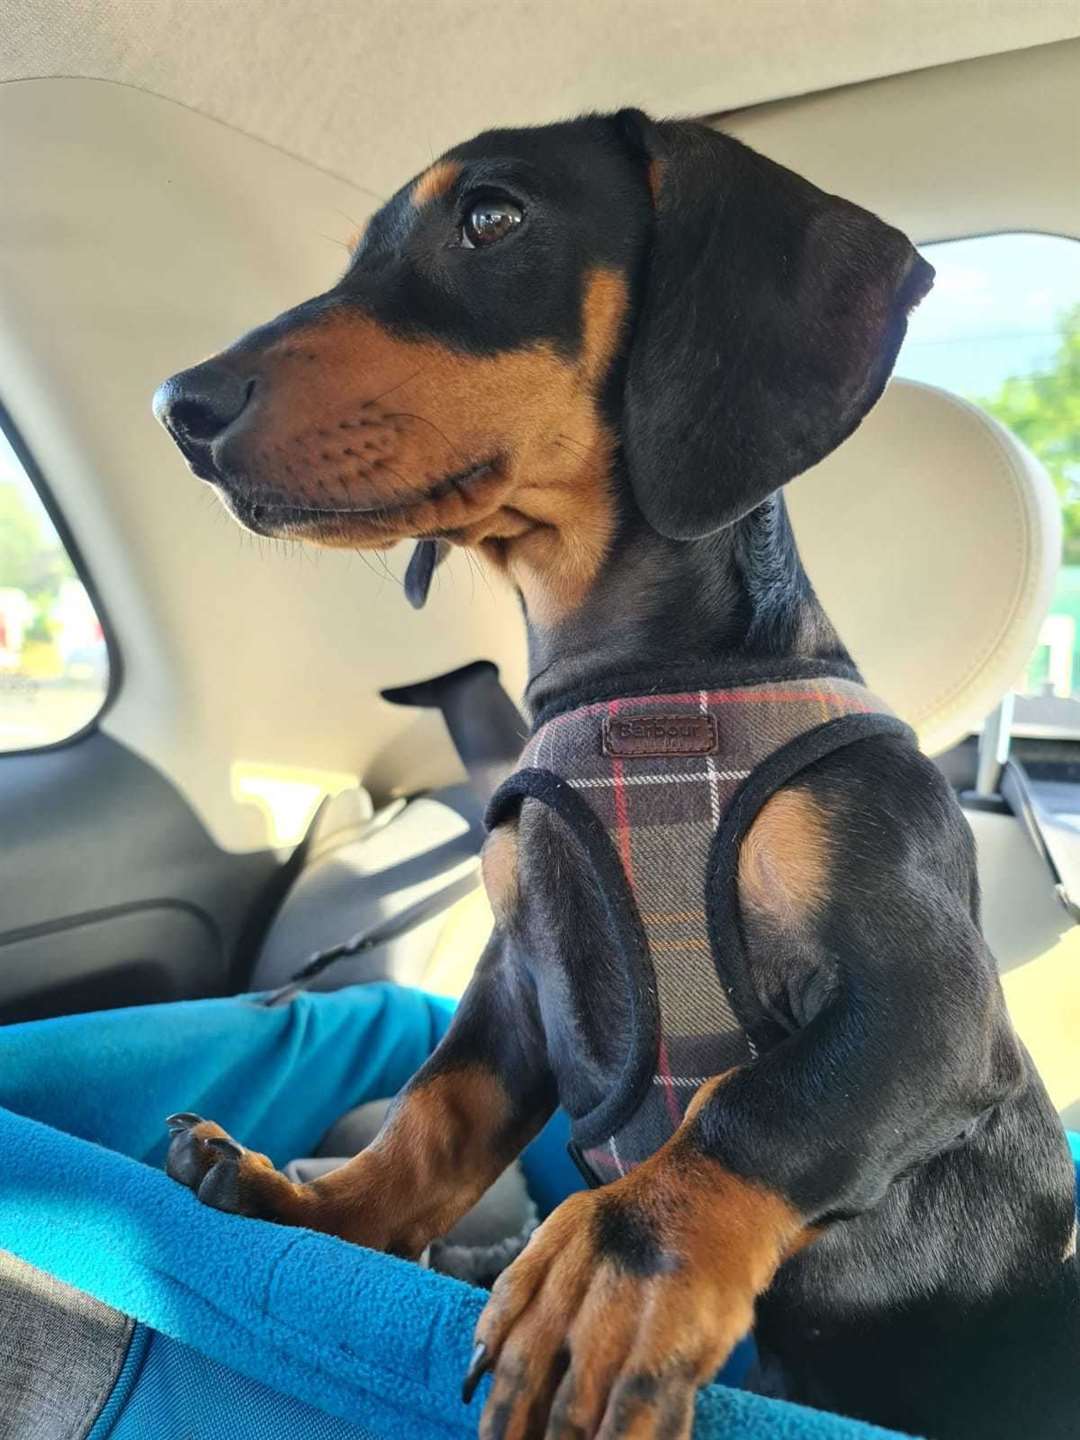 Winston is a six-month-old Dachshund puppy